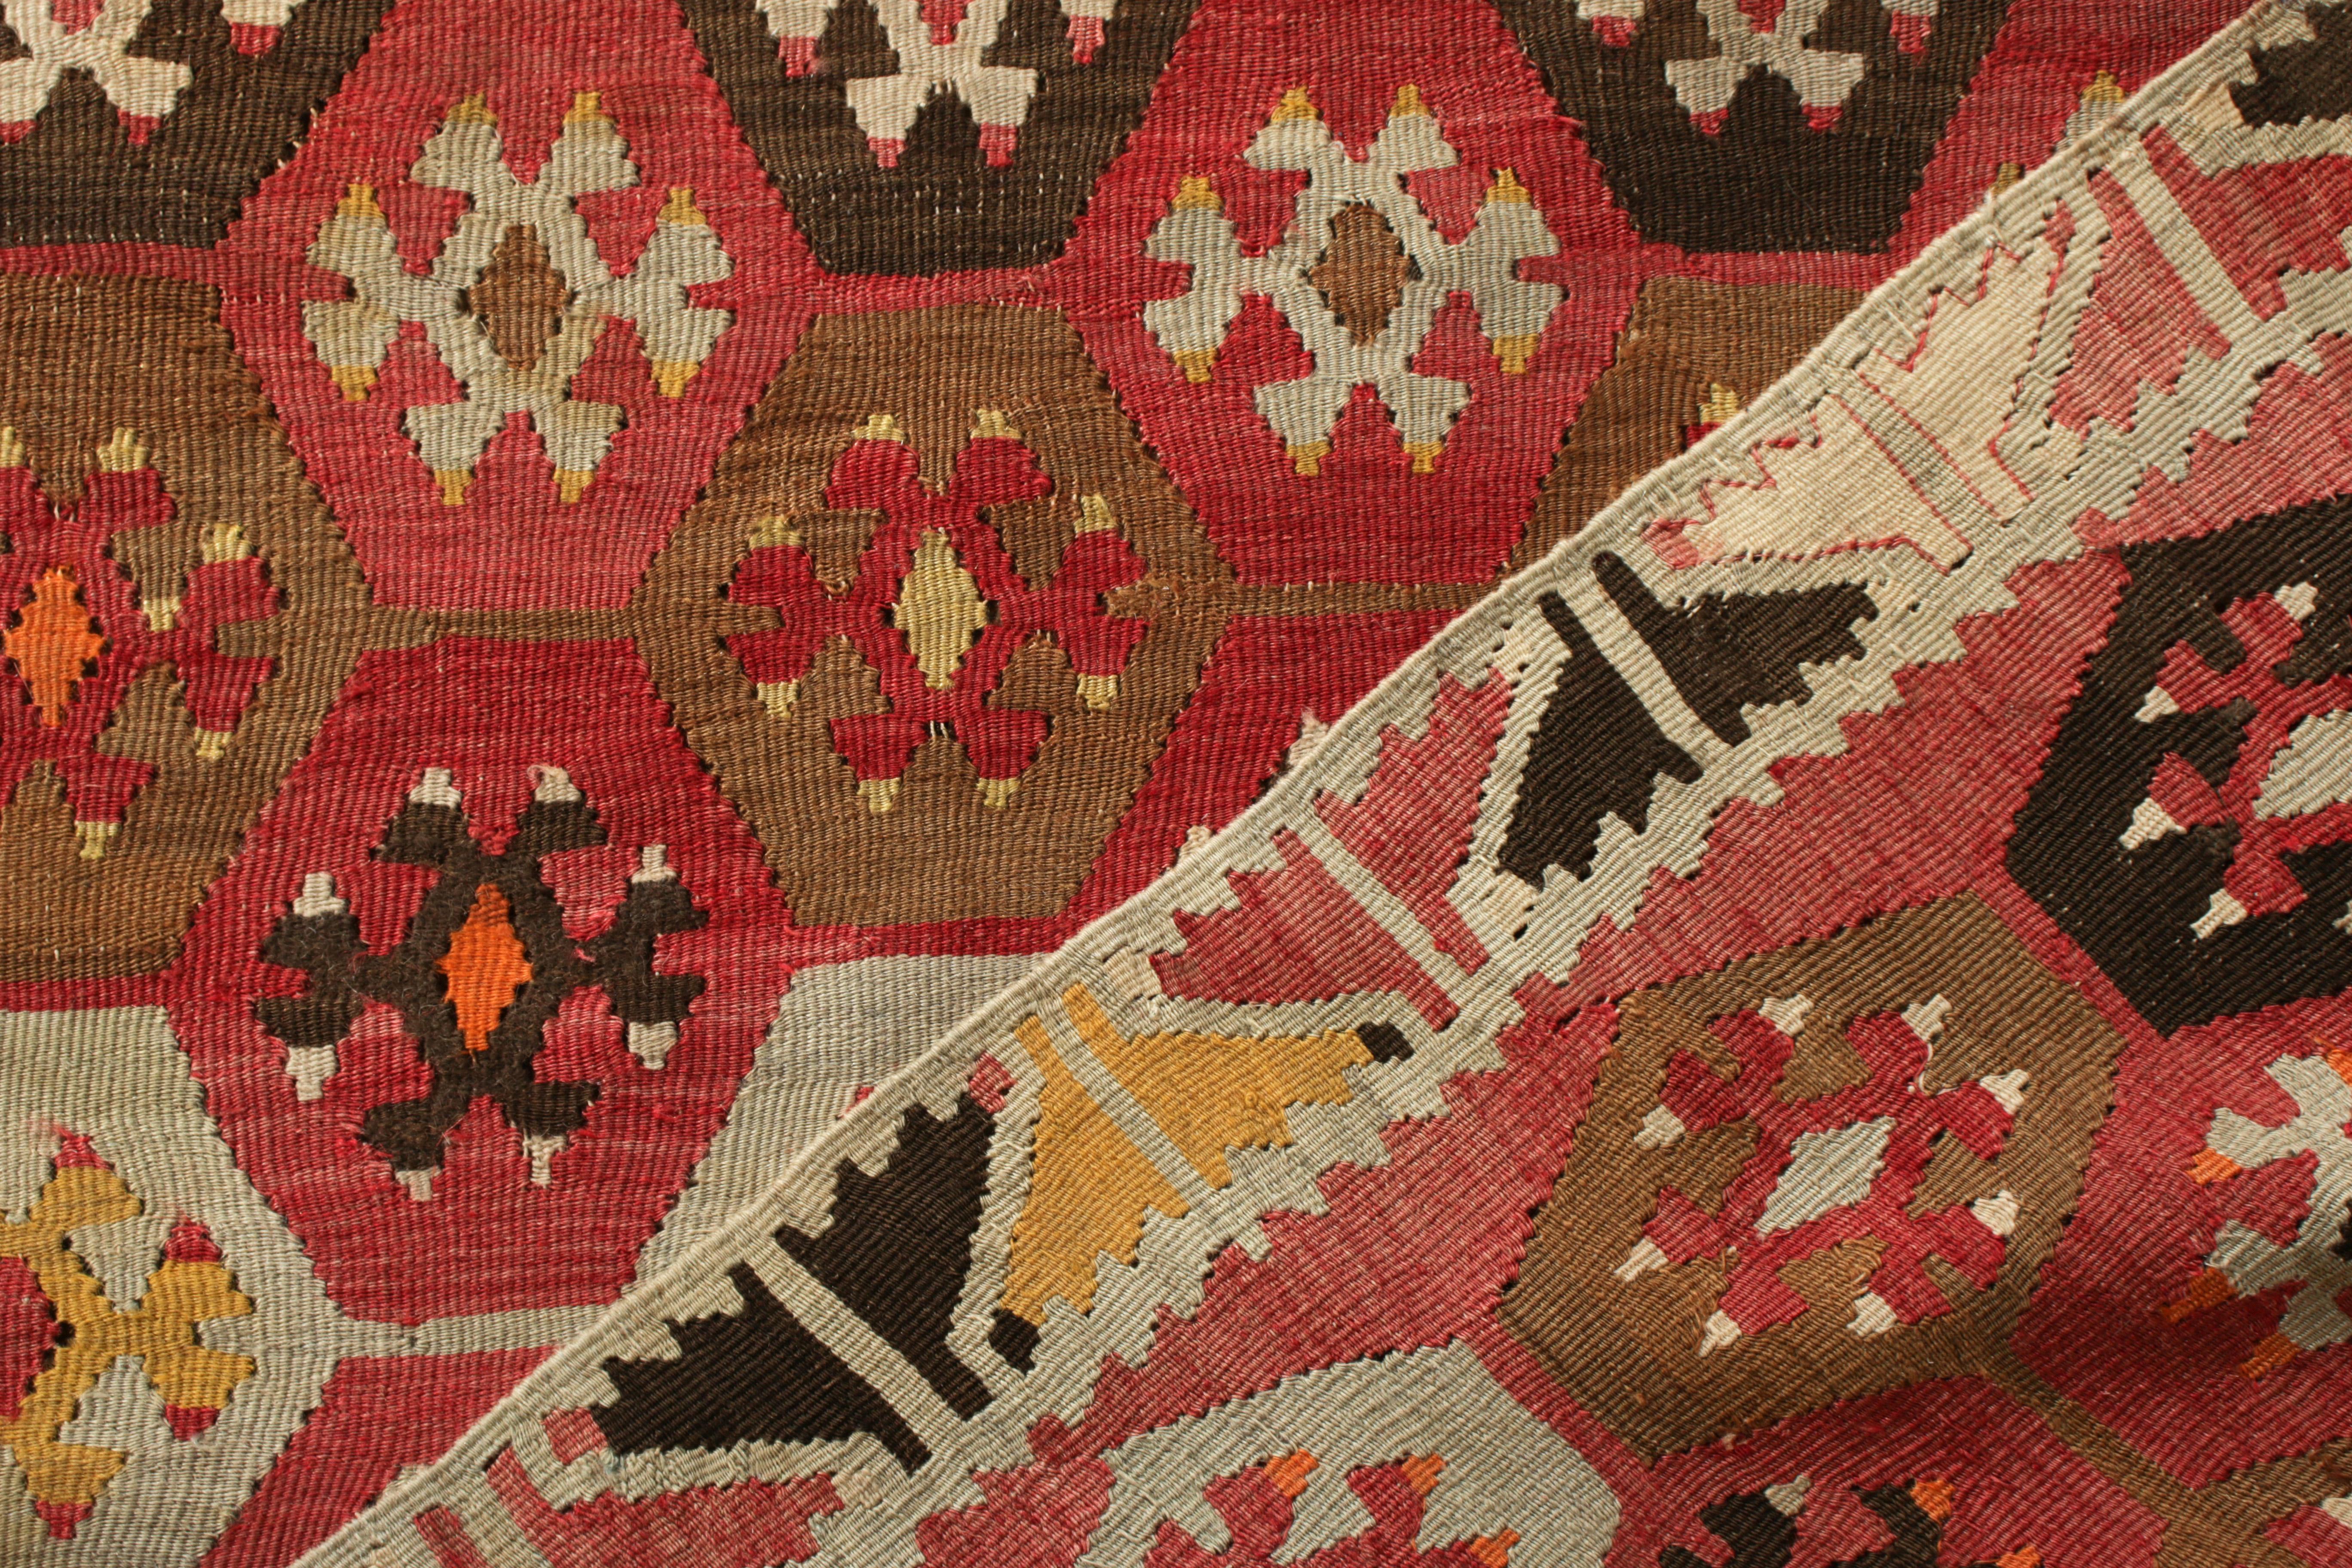 1950s Vintage Kilim Rug Geometric Red and Brown Midcentury Sarkisla Pattern In Good Condition For Sale In Long Island City, NY